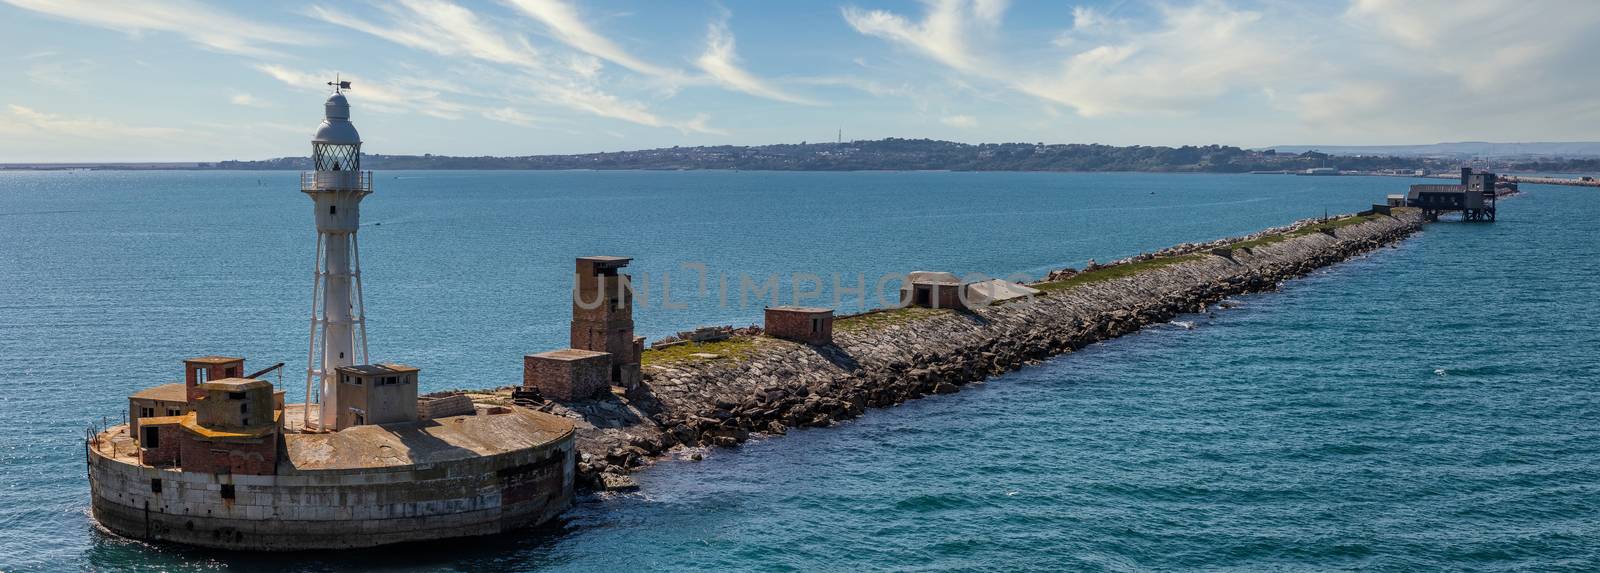 Lighthouse and water barrier at the entrance to the Portland harbour in Weymouth Bay, UK by DamantisZ